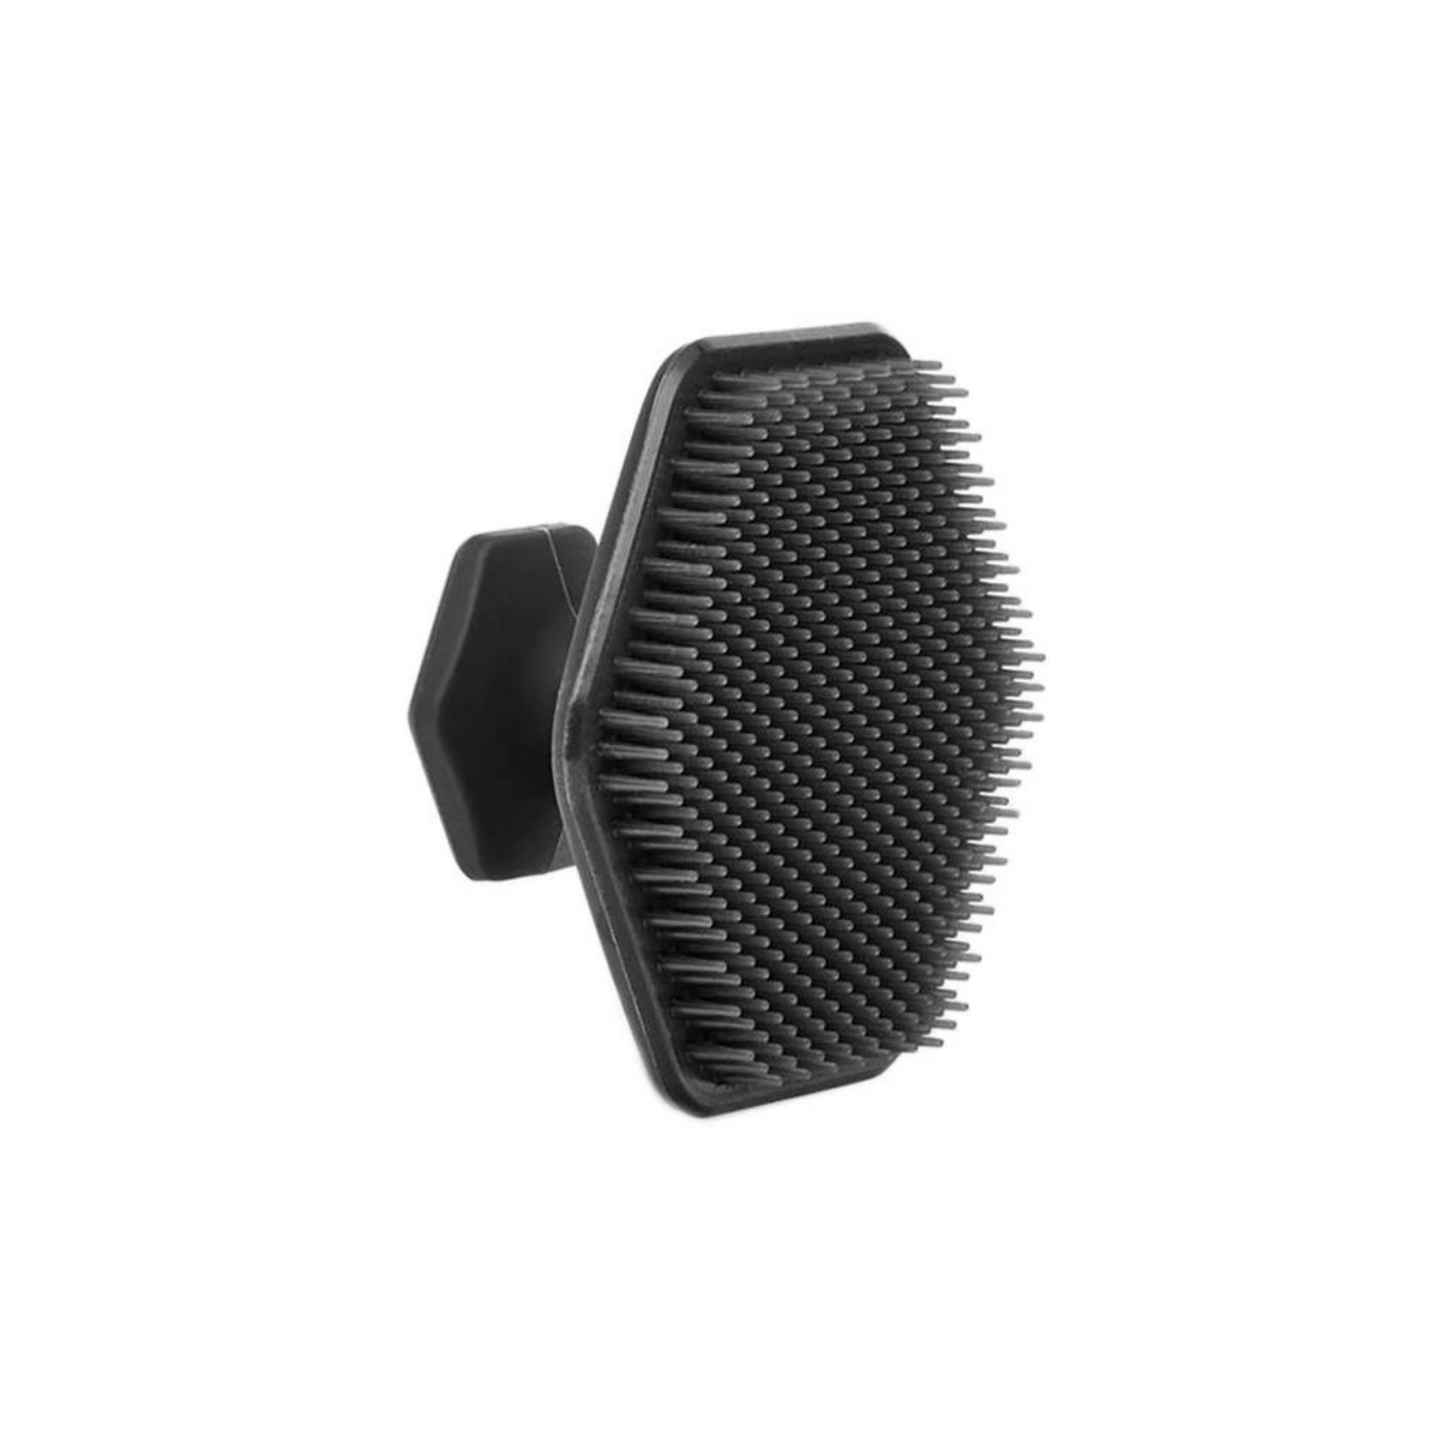 Primary Image of The Face Scrubber